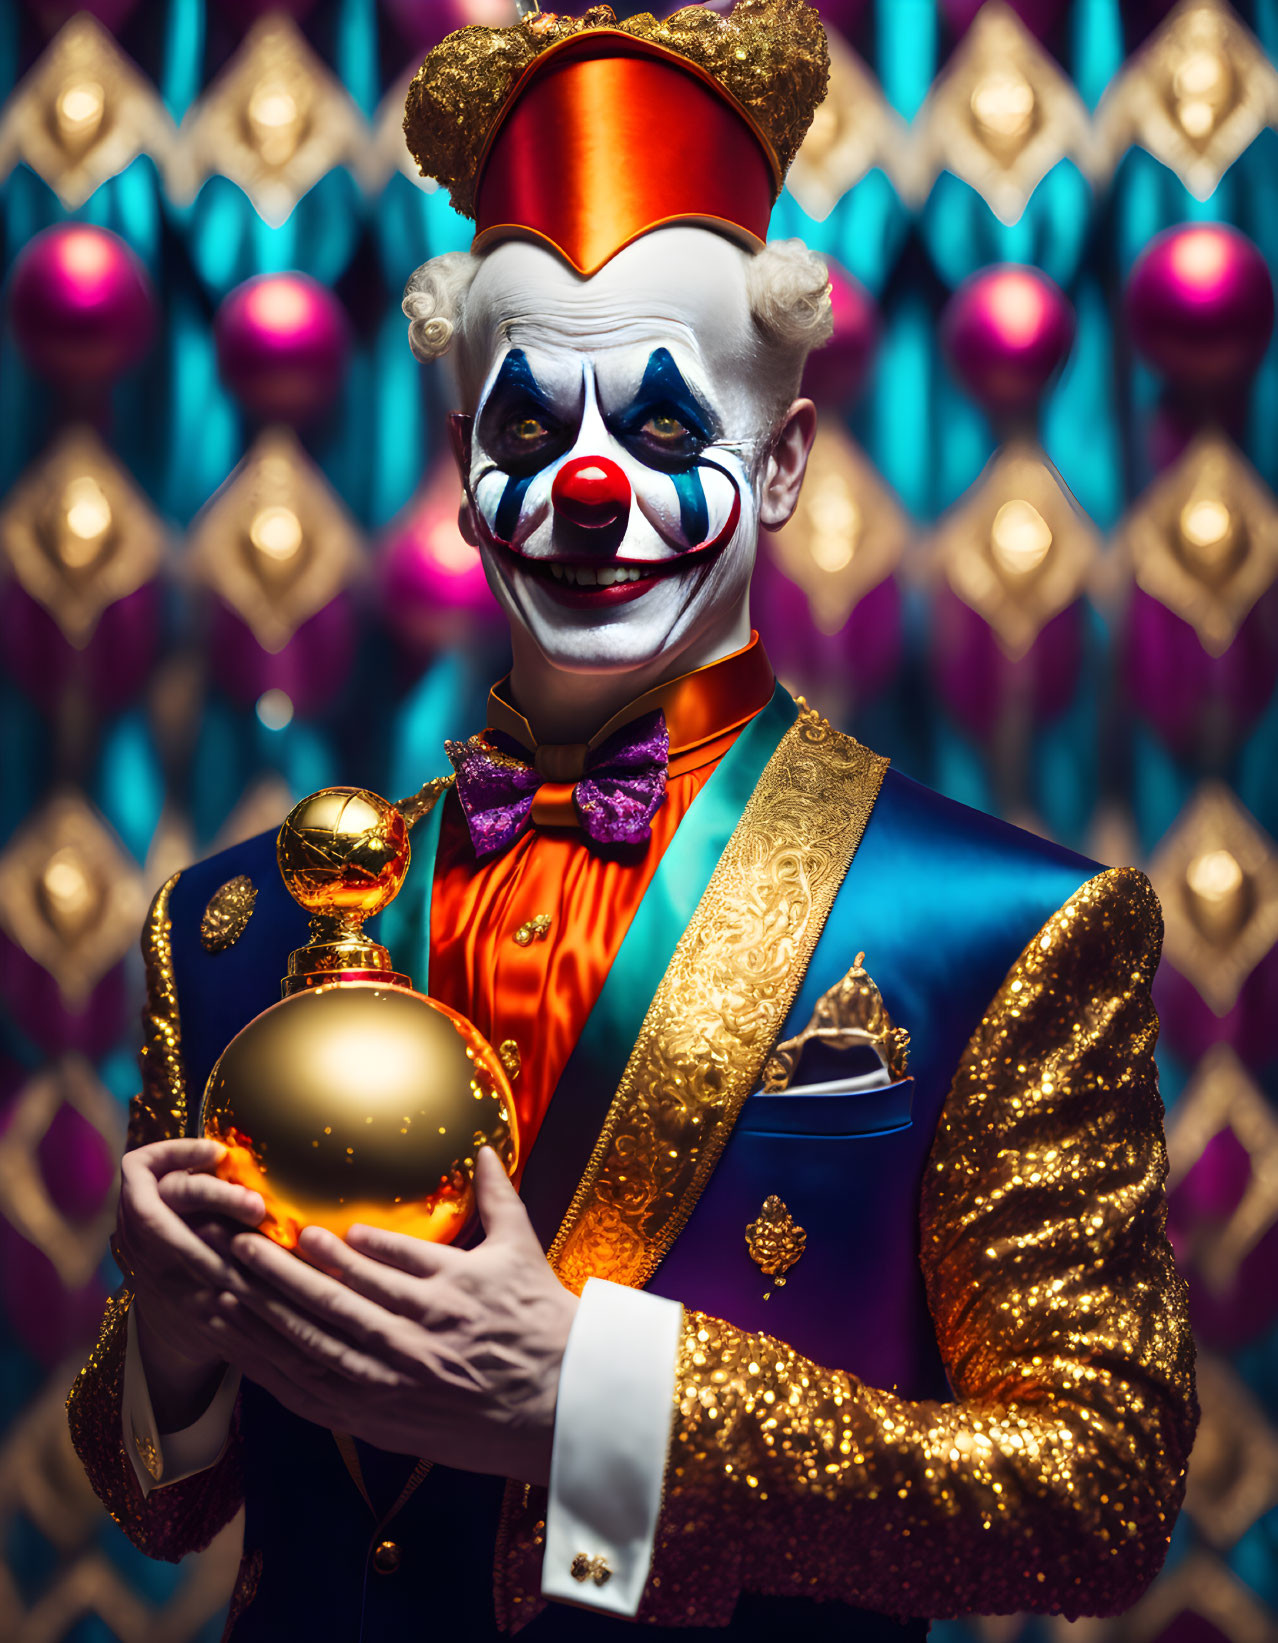 Elaborate Blue and Gold Clown Costume with Scepter on Patterned Background